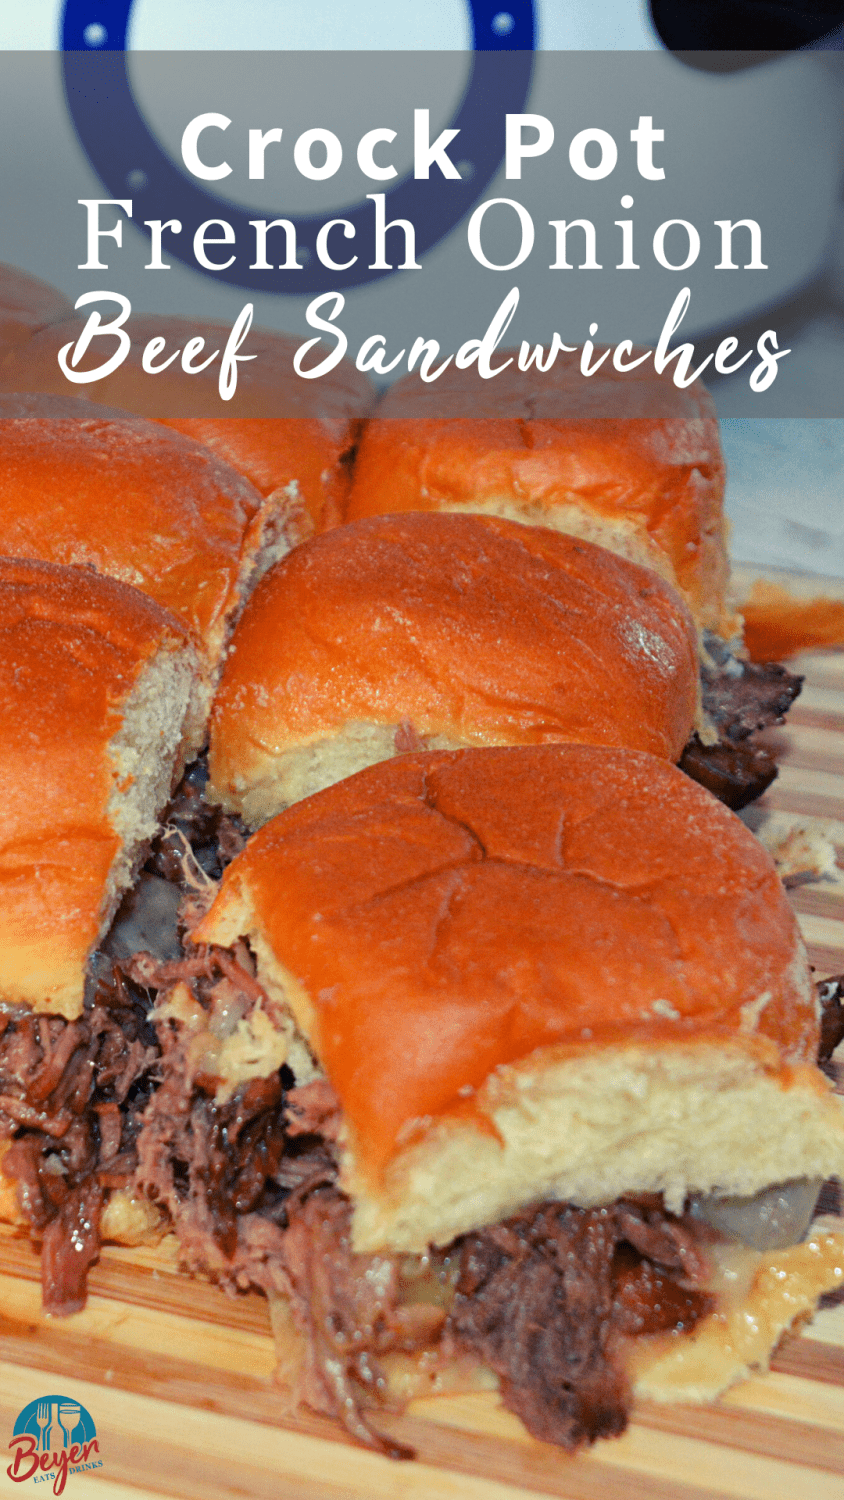 Crock Pot French onion beef sandwich recipe is a shredded French onion beef roast made with canned French onion soup, onions, butter and beef broth used to make cheesy sliders on Hawaiian rolls.